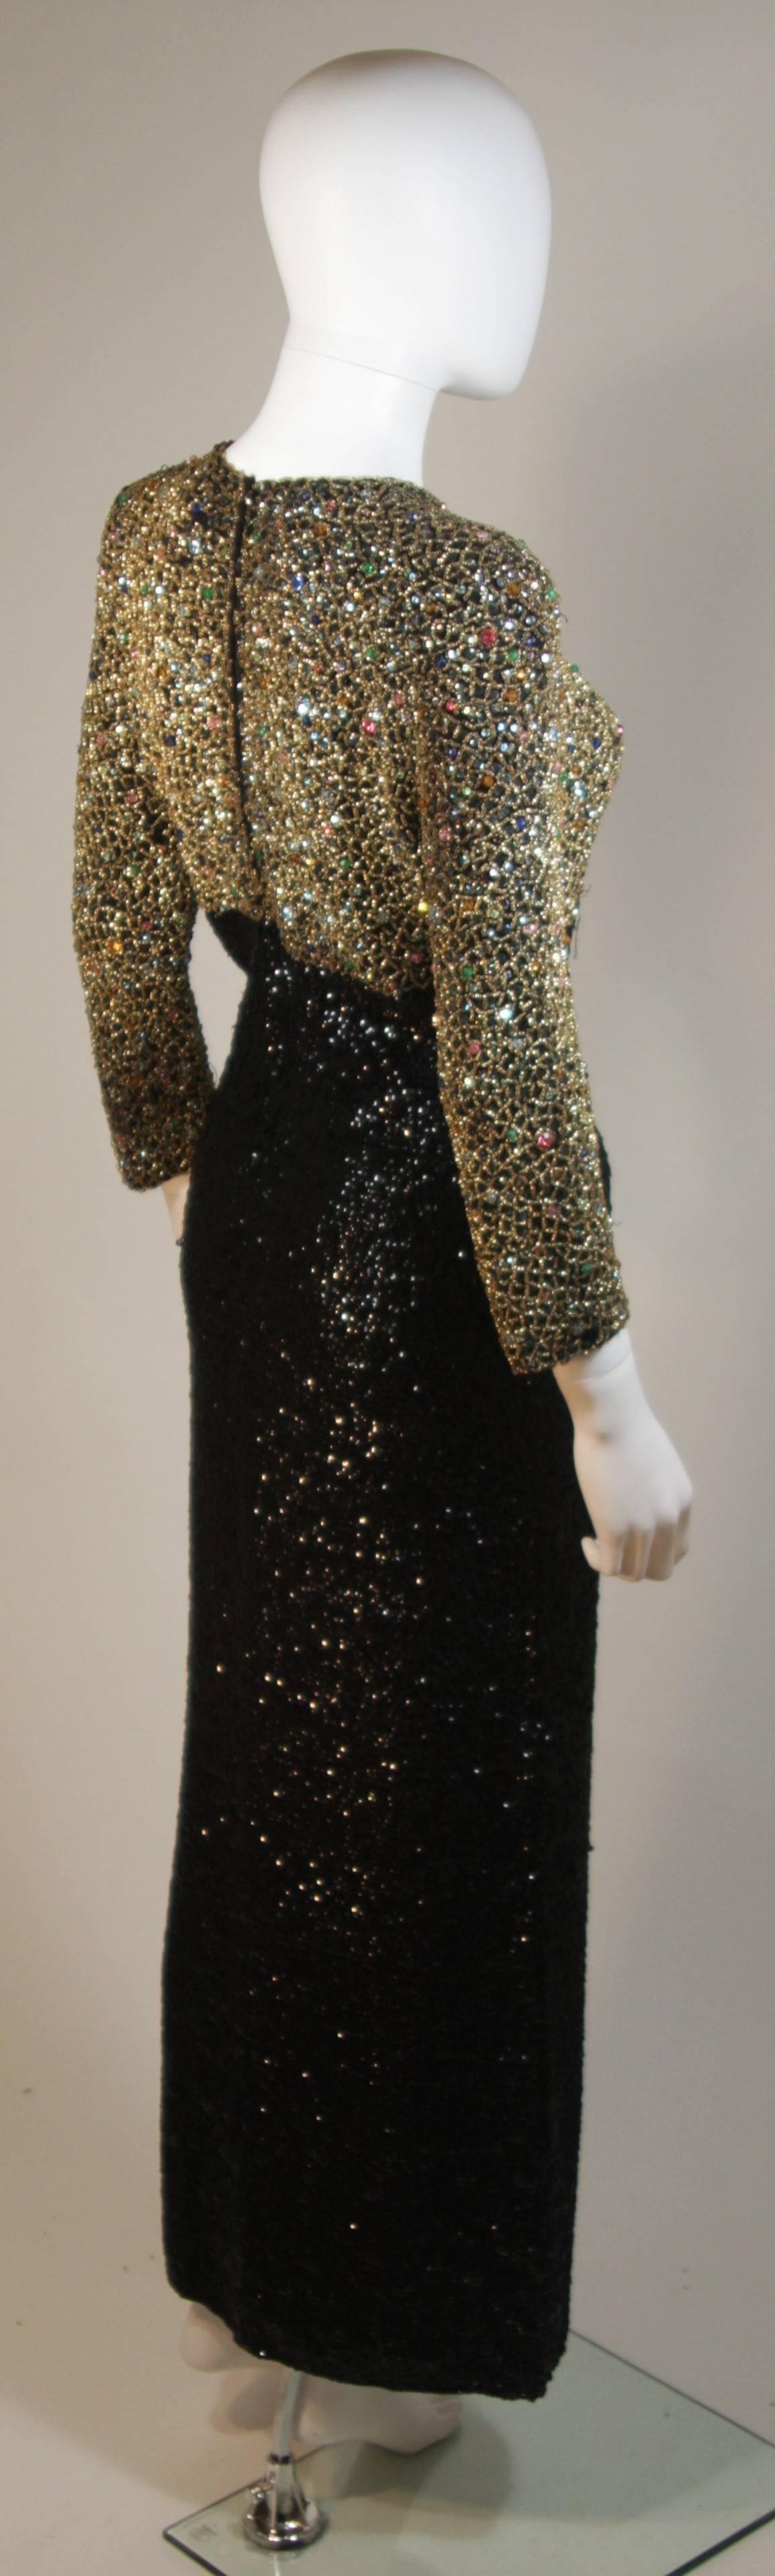 GENE SHELLY'S Boutique Internationale Embellished Stretch Black Knit Gown Size 8 For Sale 2